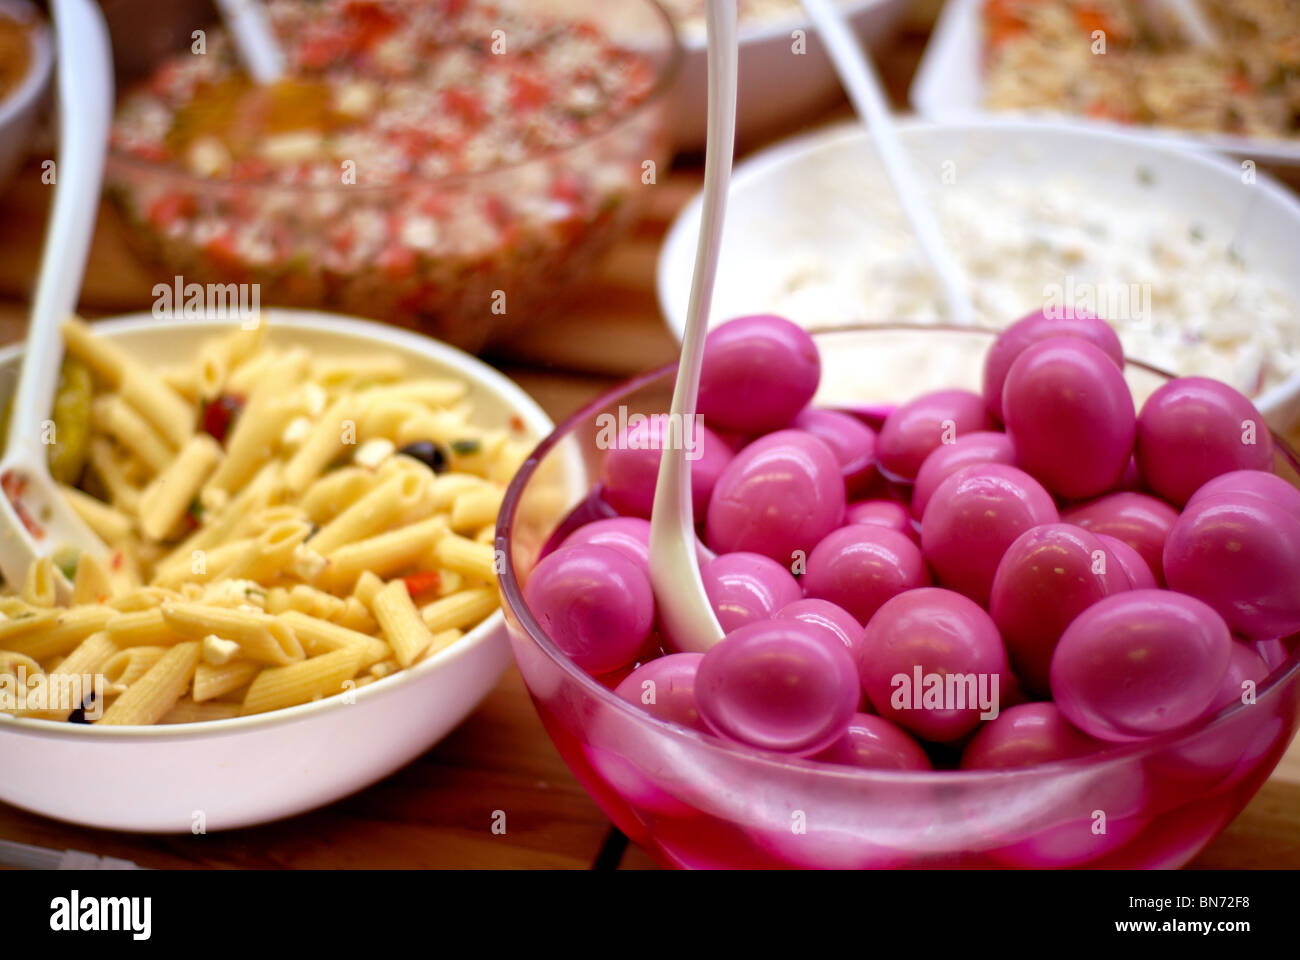 Deviled egg, salsa and pasta salad are some of the deli foods pictured. Stock Photo